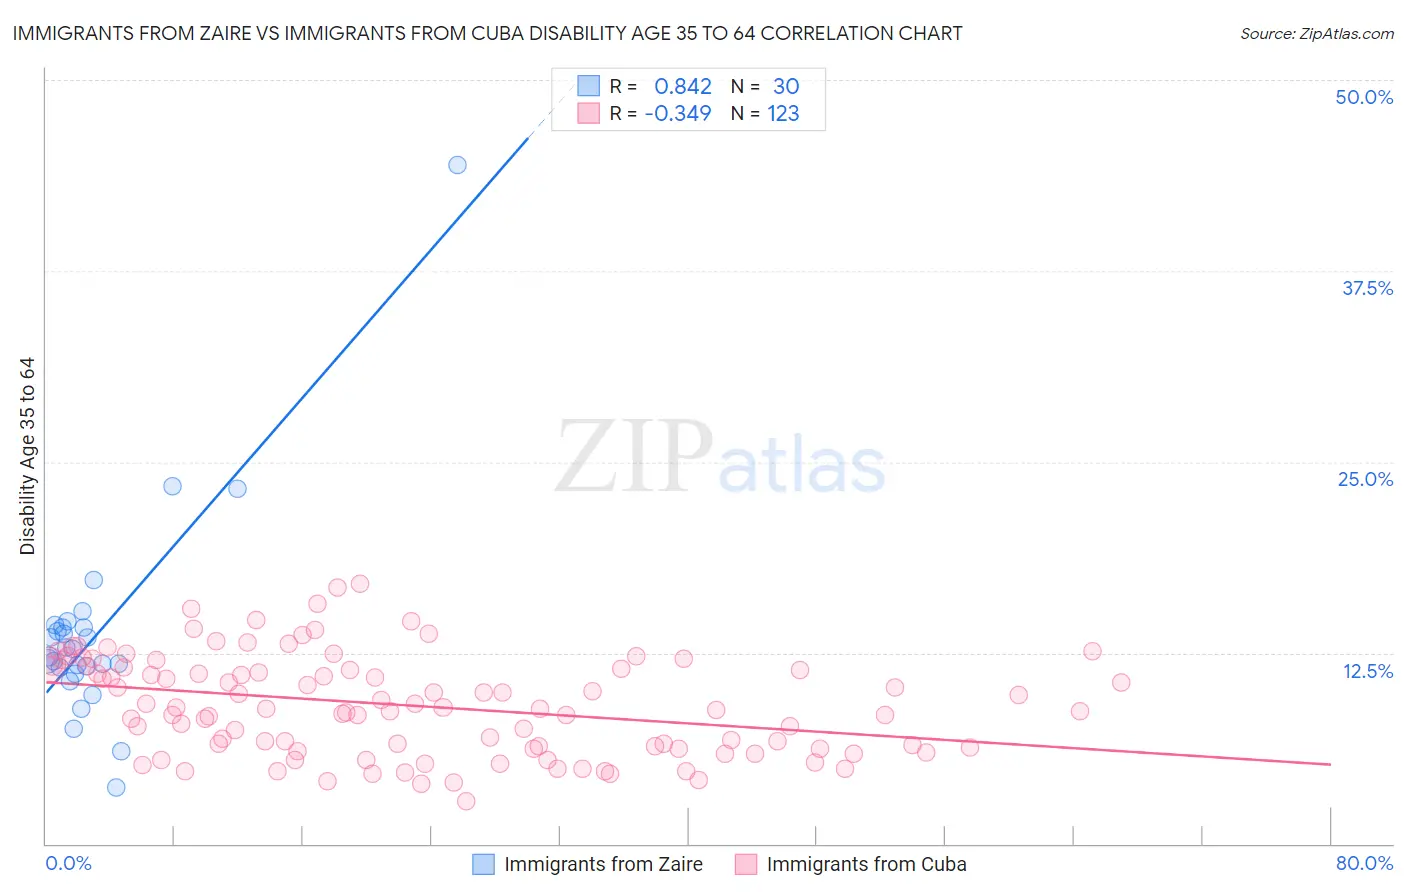 Immigrants from Zaire vs Immigrants from Cuba Disability Age 35 to 64